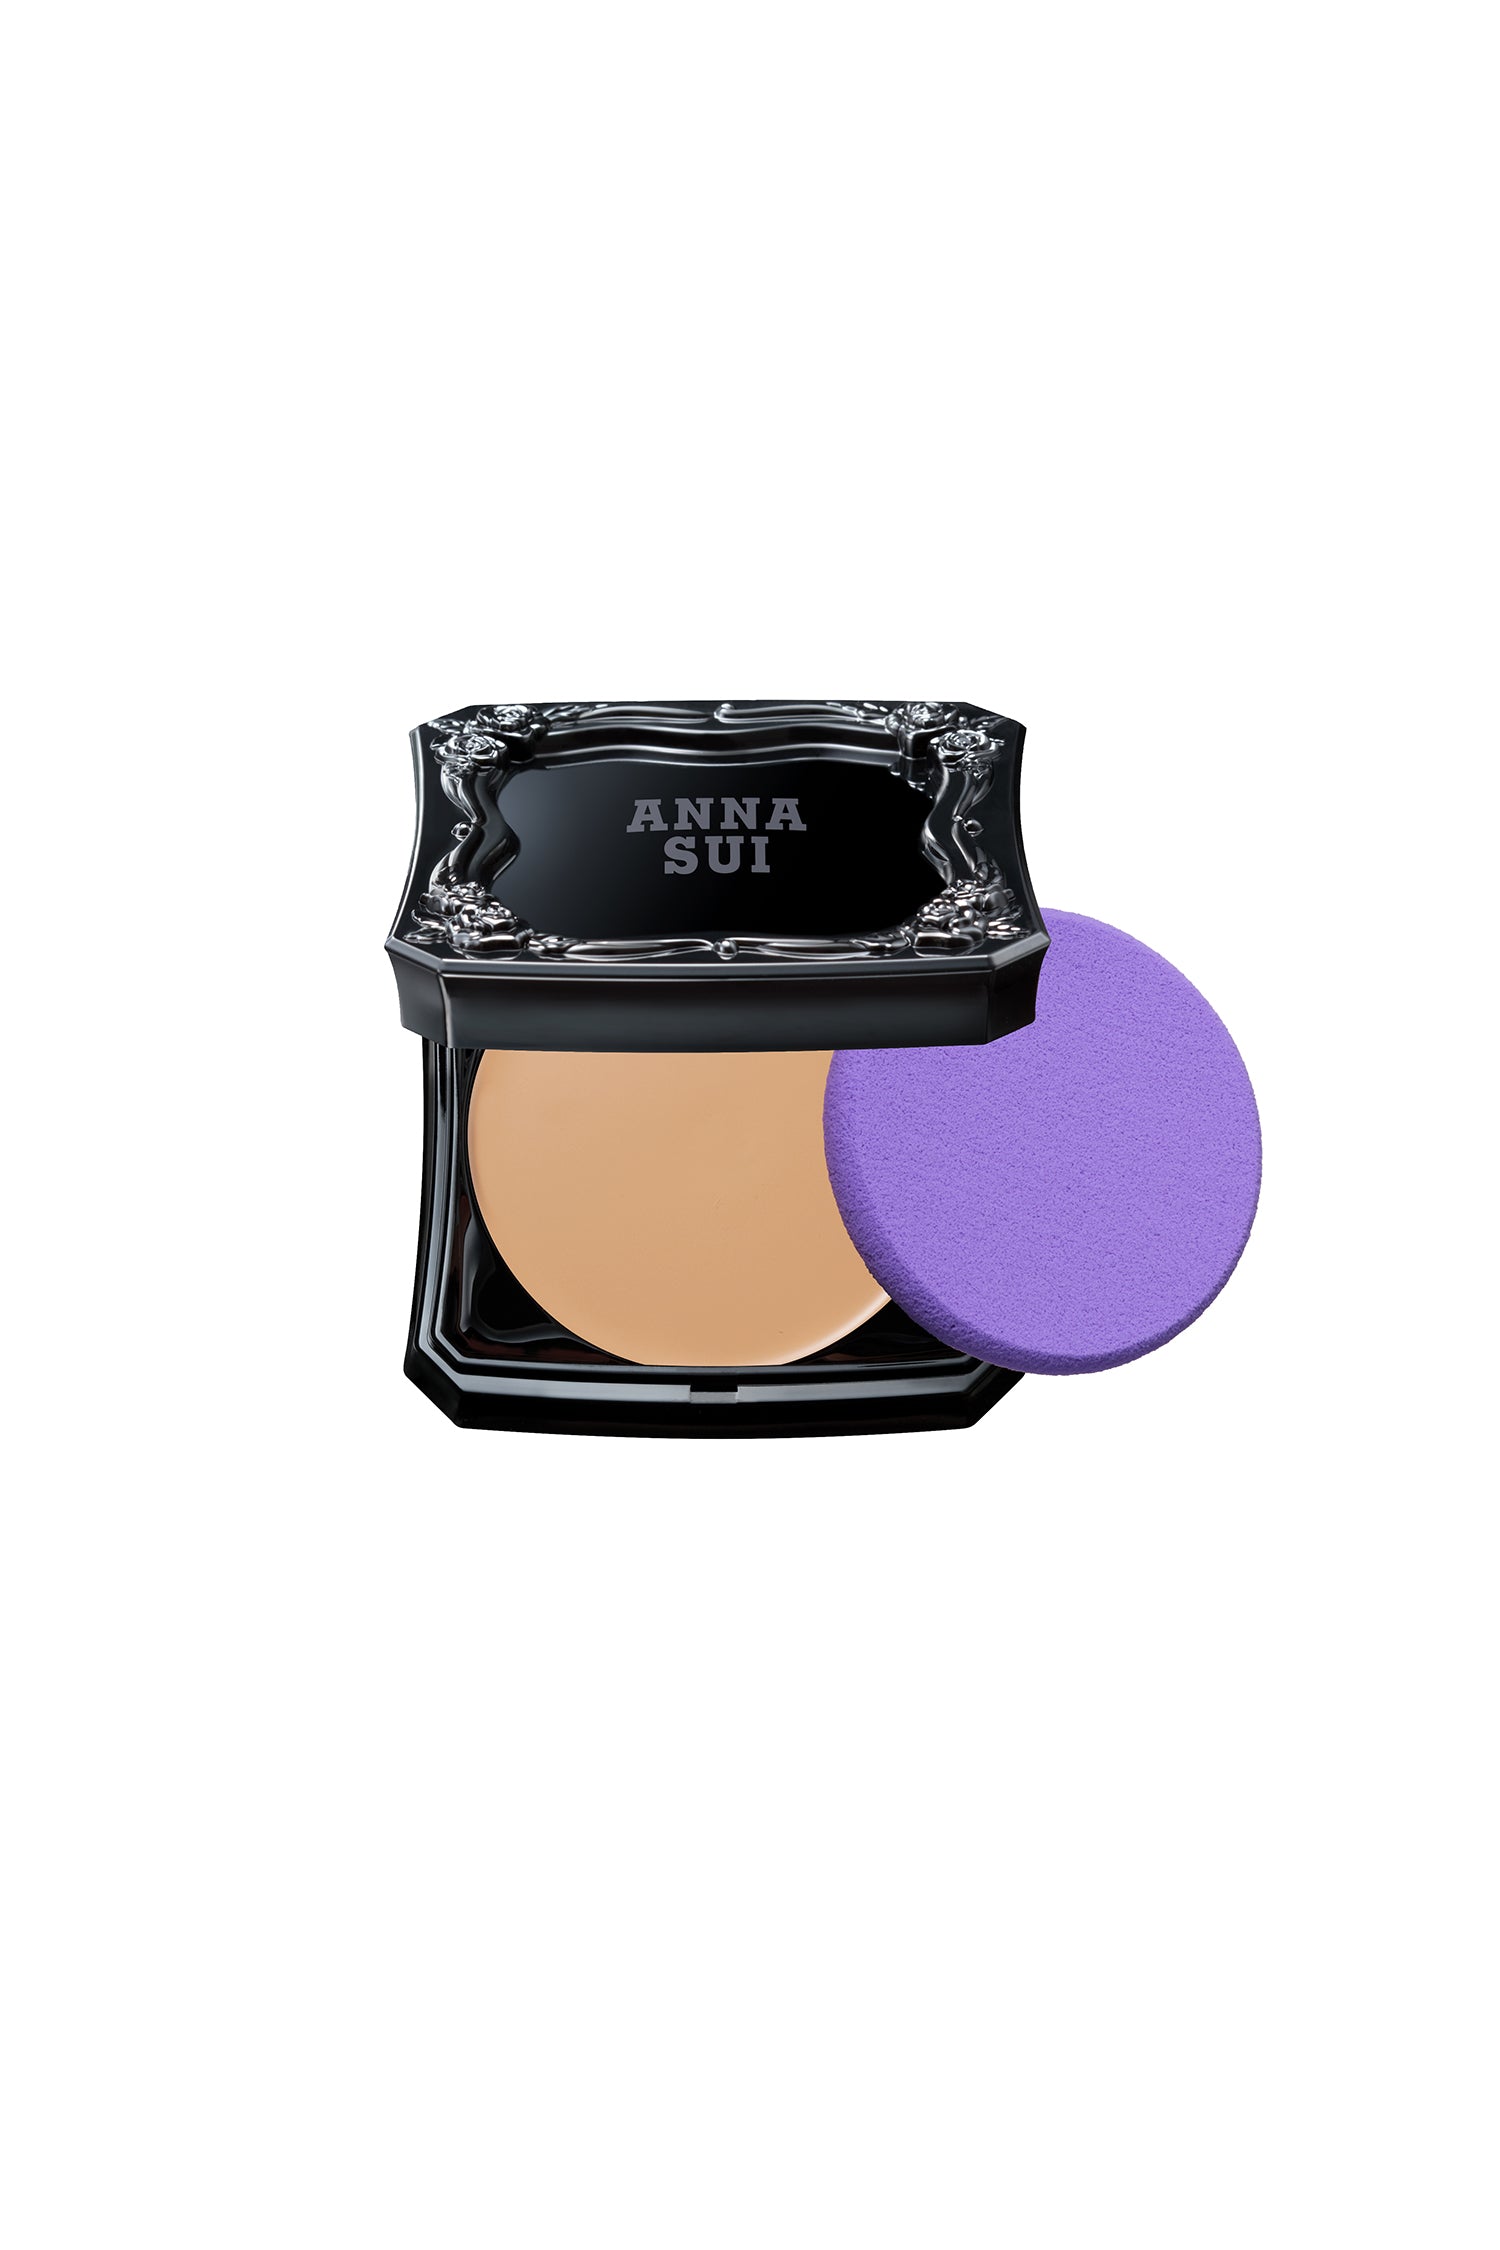 MEDIUM foundation in a black container, raised rose pattern and Anna Sui label